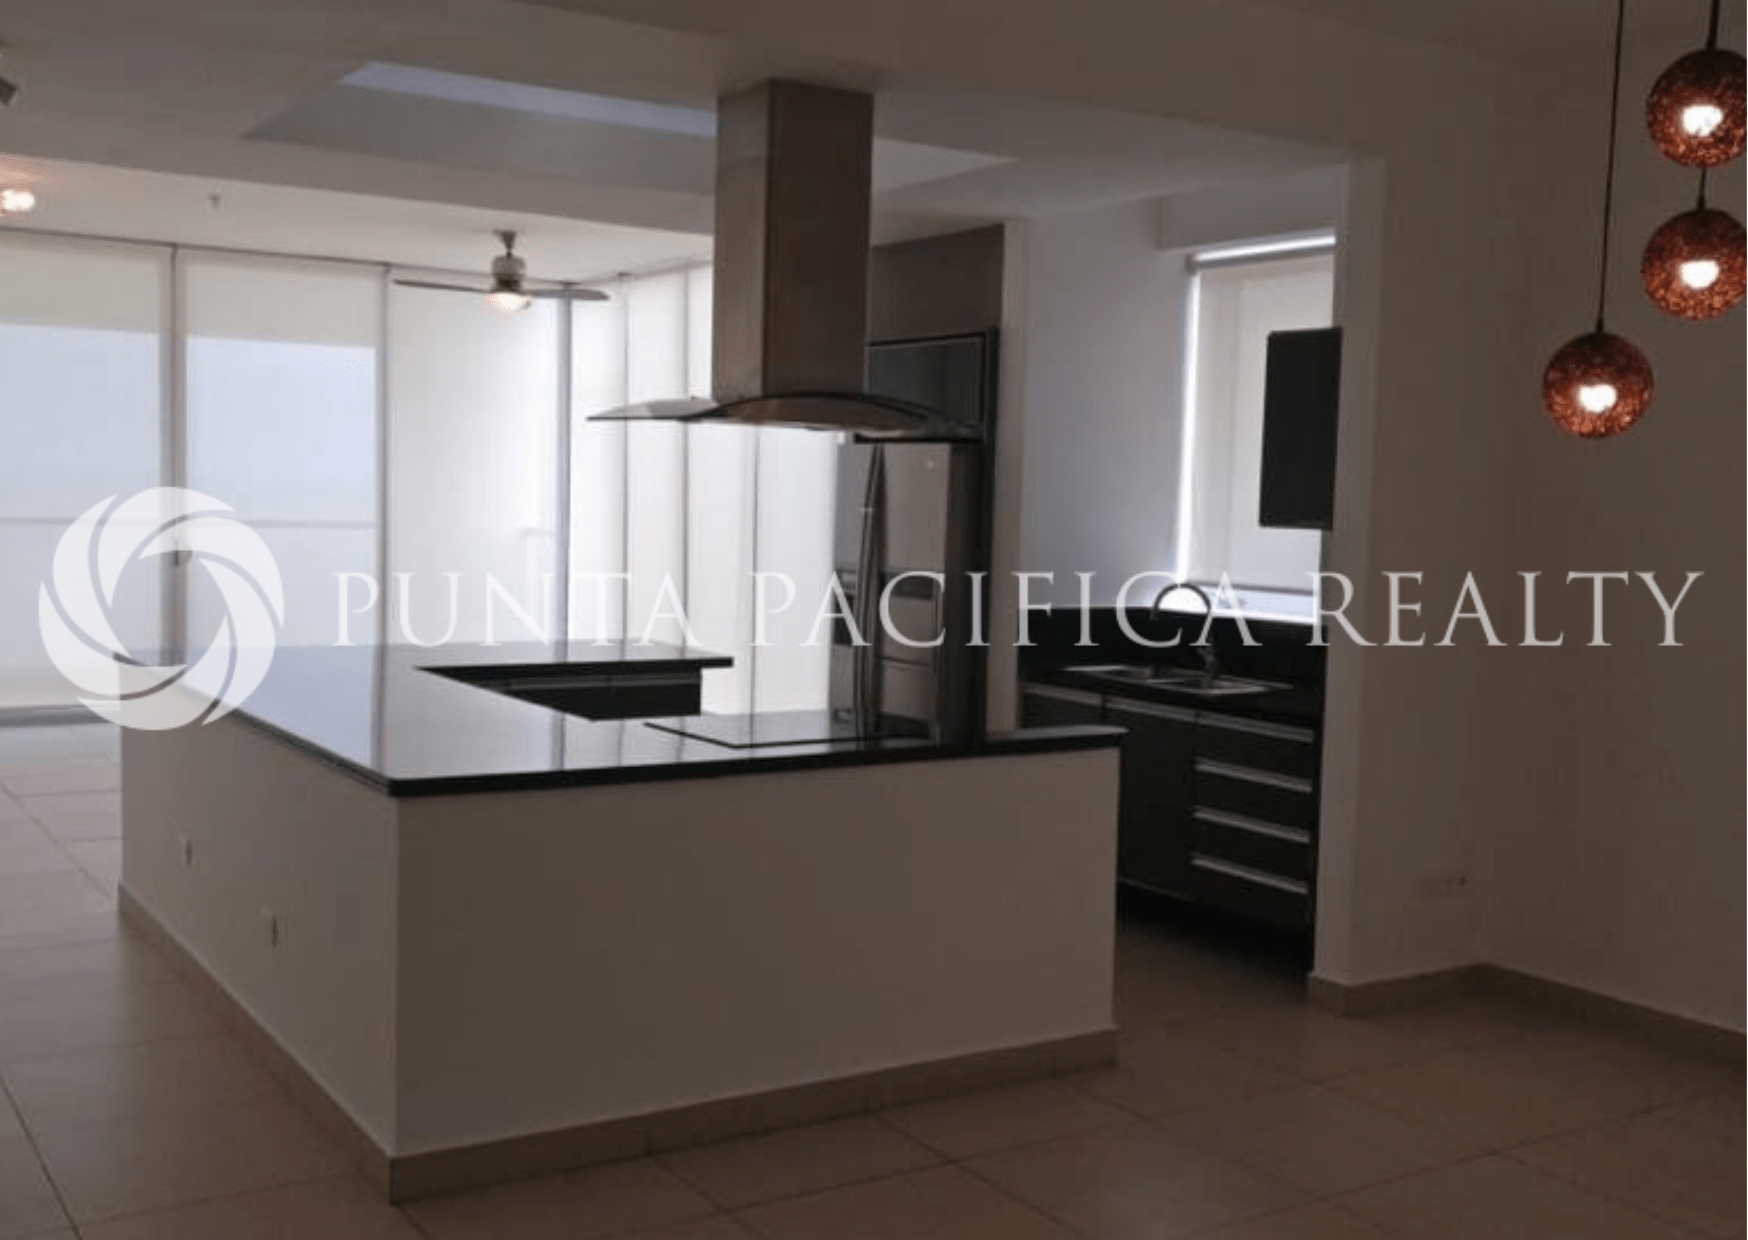 For RENT | | Remodeled | Unfurnished 2-Bedroom Apartment In RIVAGE